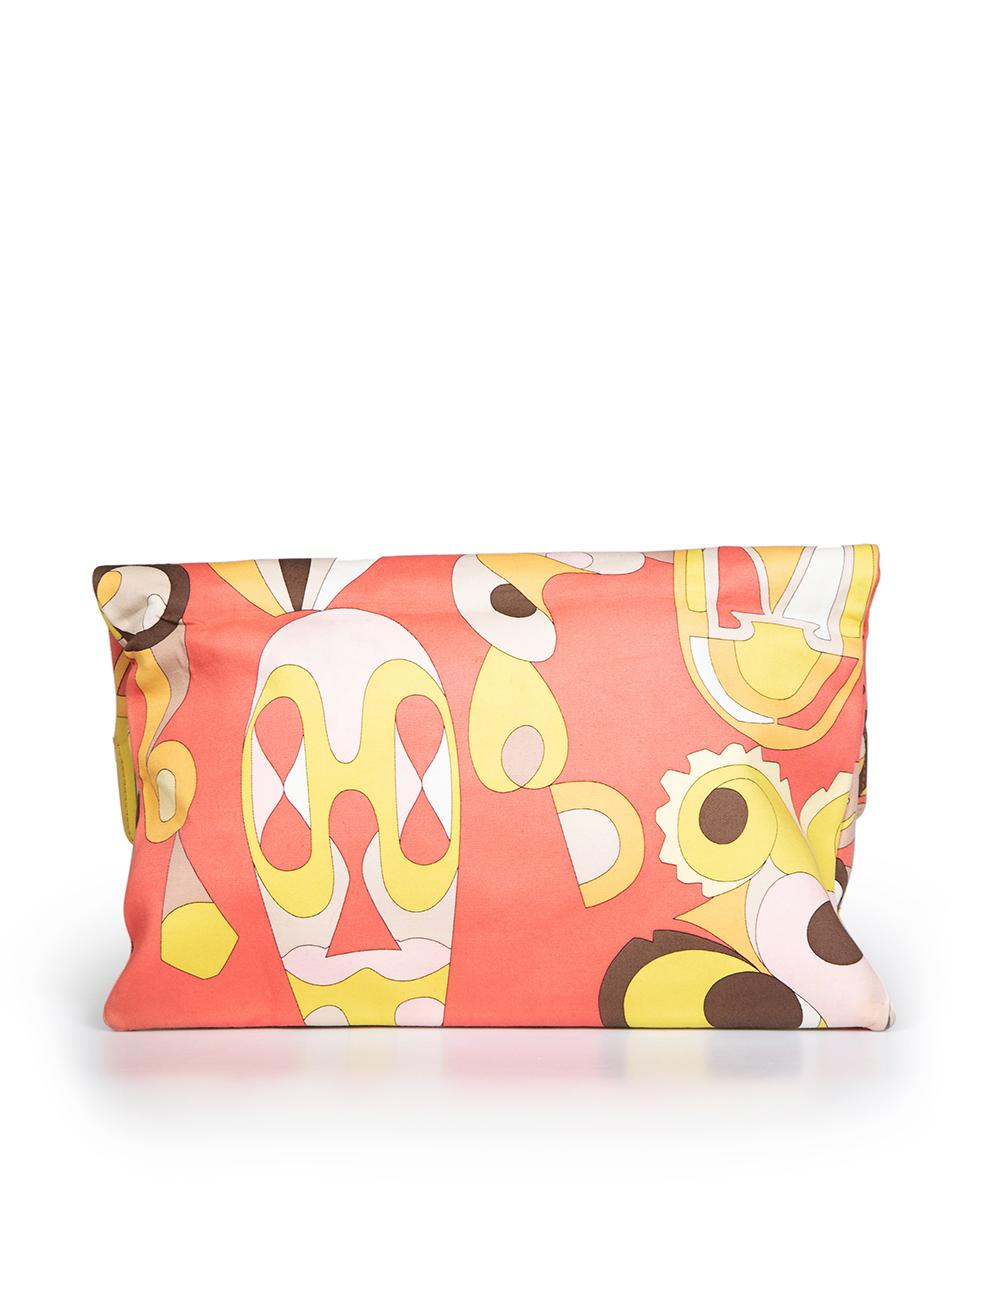 Emilio Pucci Coral Abstract Print Handbag In Good Condition In London, GB